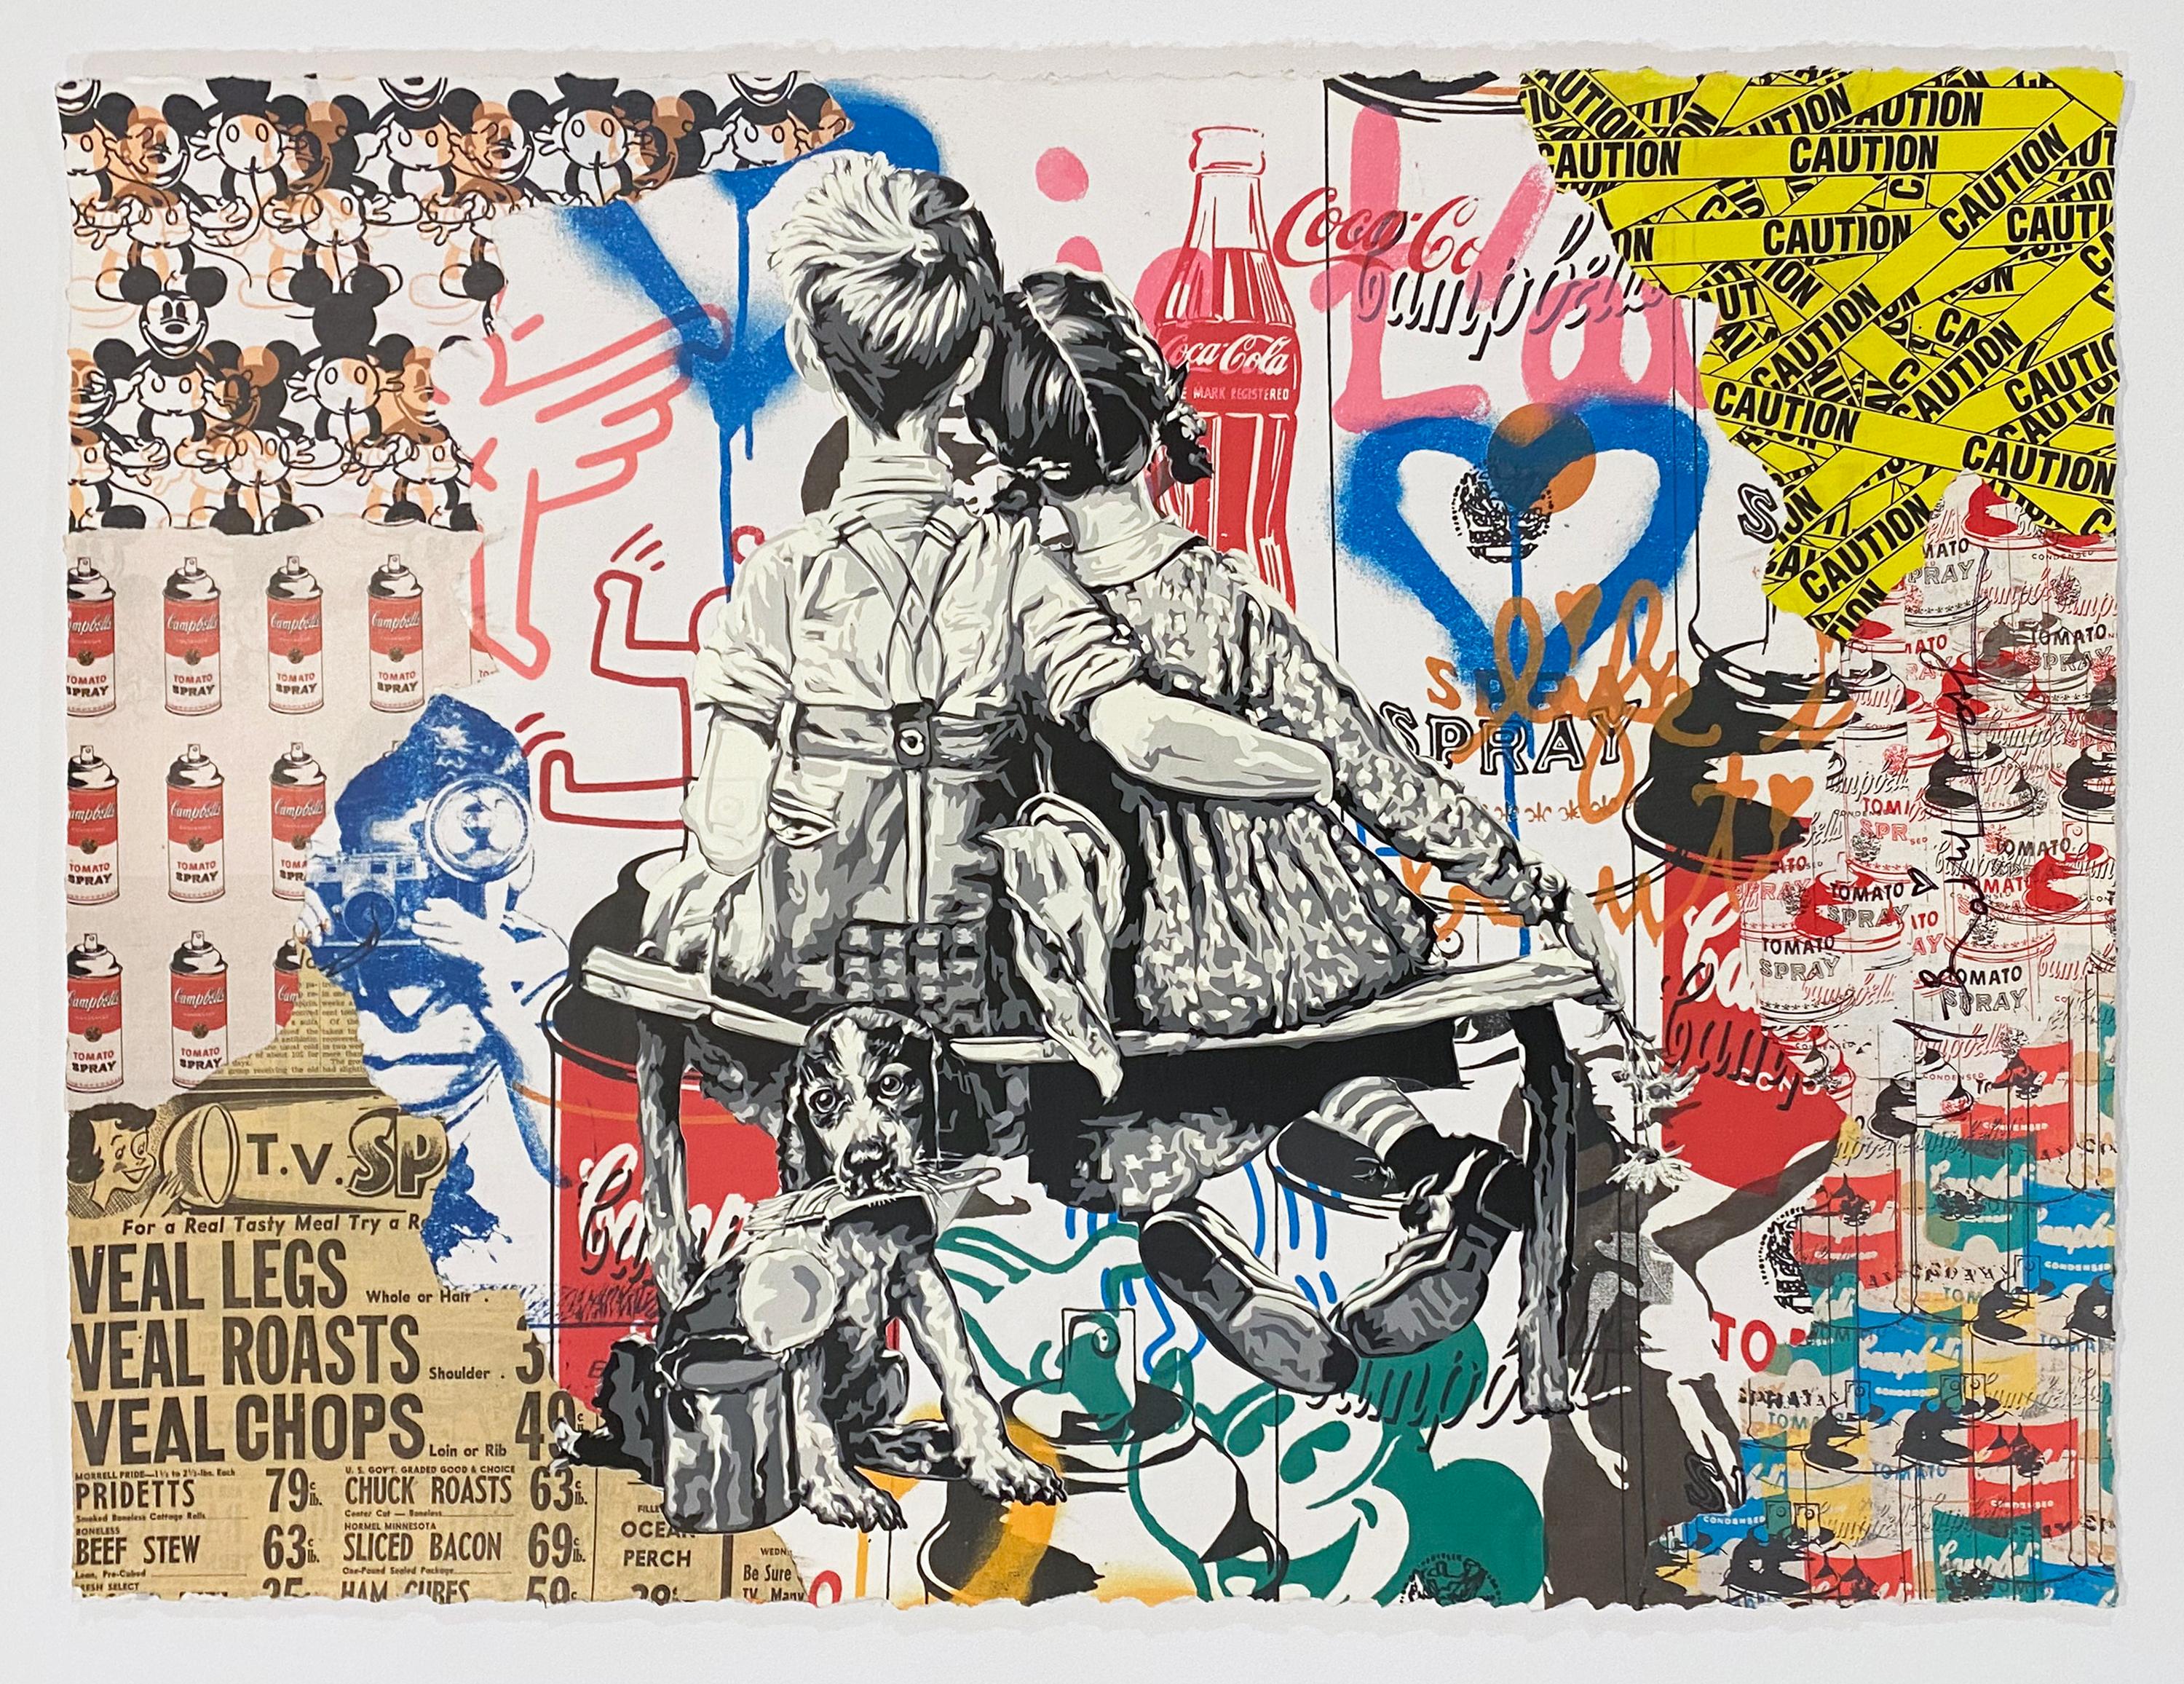 Artist: Mr. Brainwash
Title: Work Well Together
Medium: Unique silkscreen on paper
Date: 2023
Edition: One of a kind
Frame Size: 29